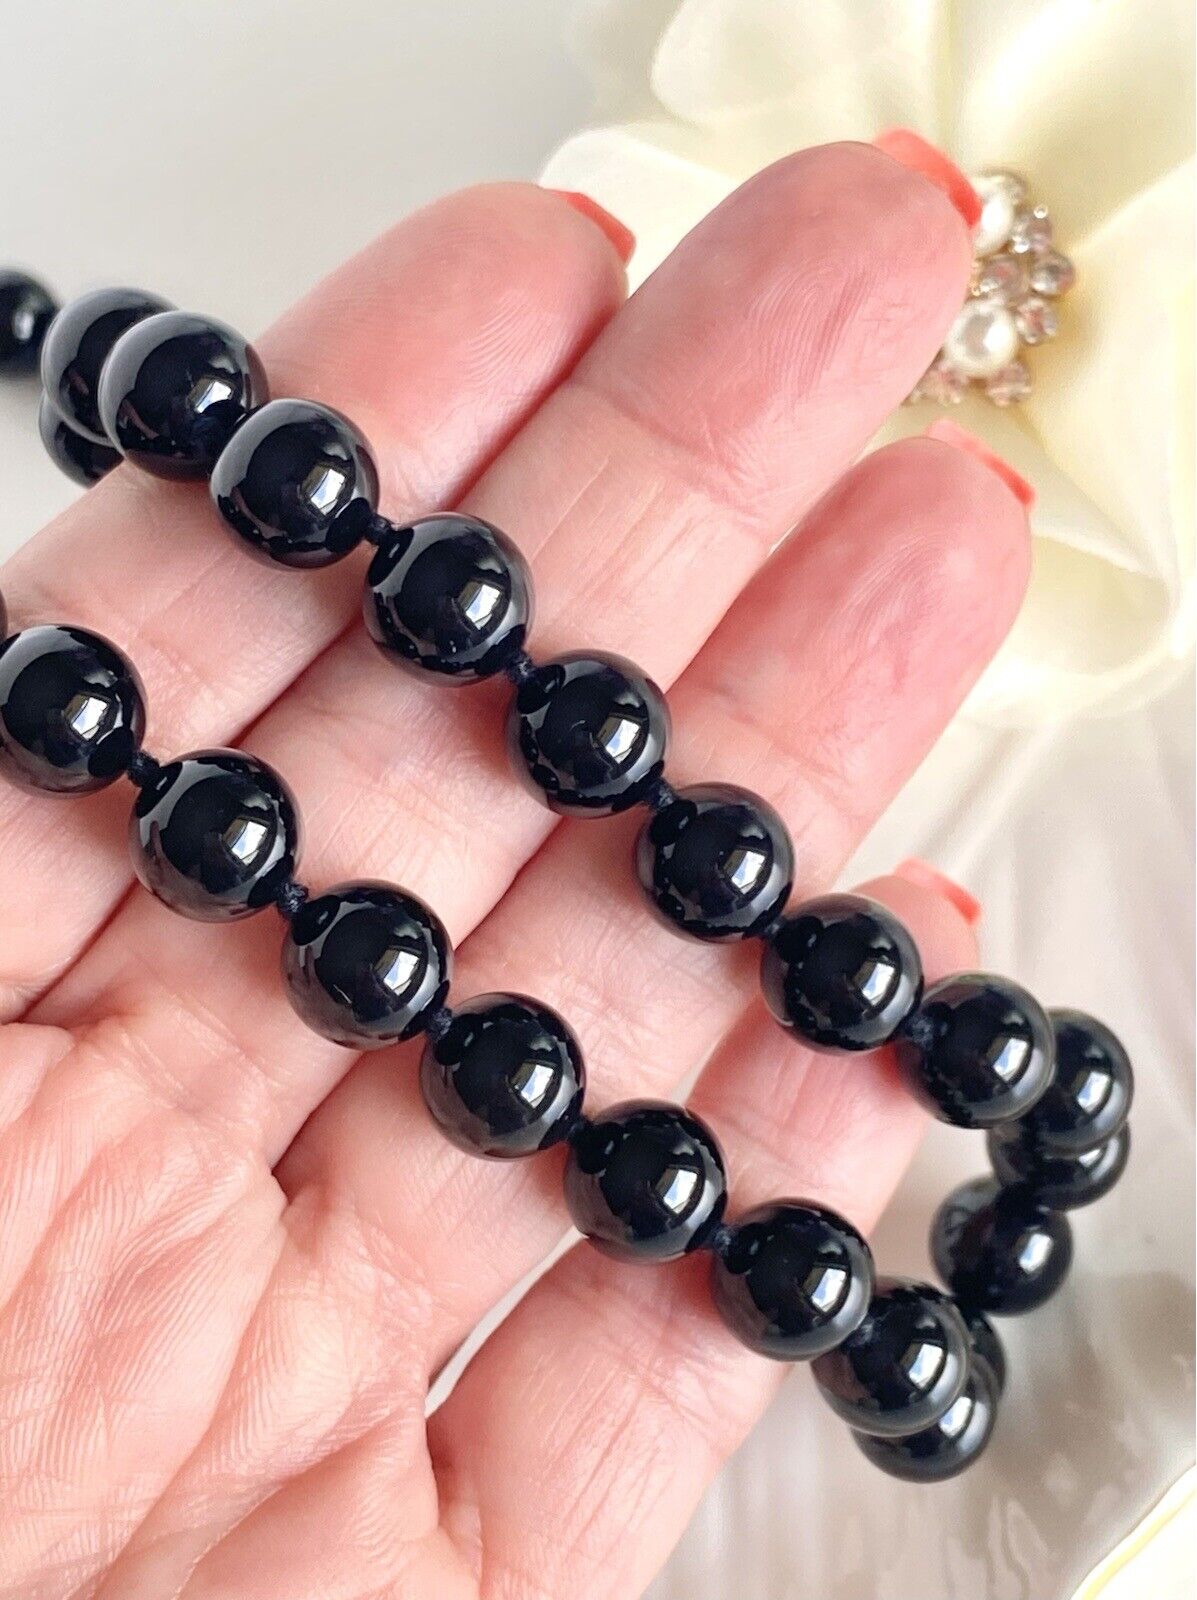 Genuine 10mm Black Onyx Knotted Endless Necklace, New, 32"